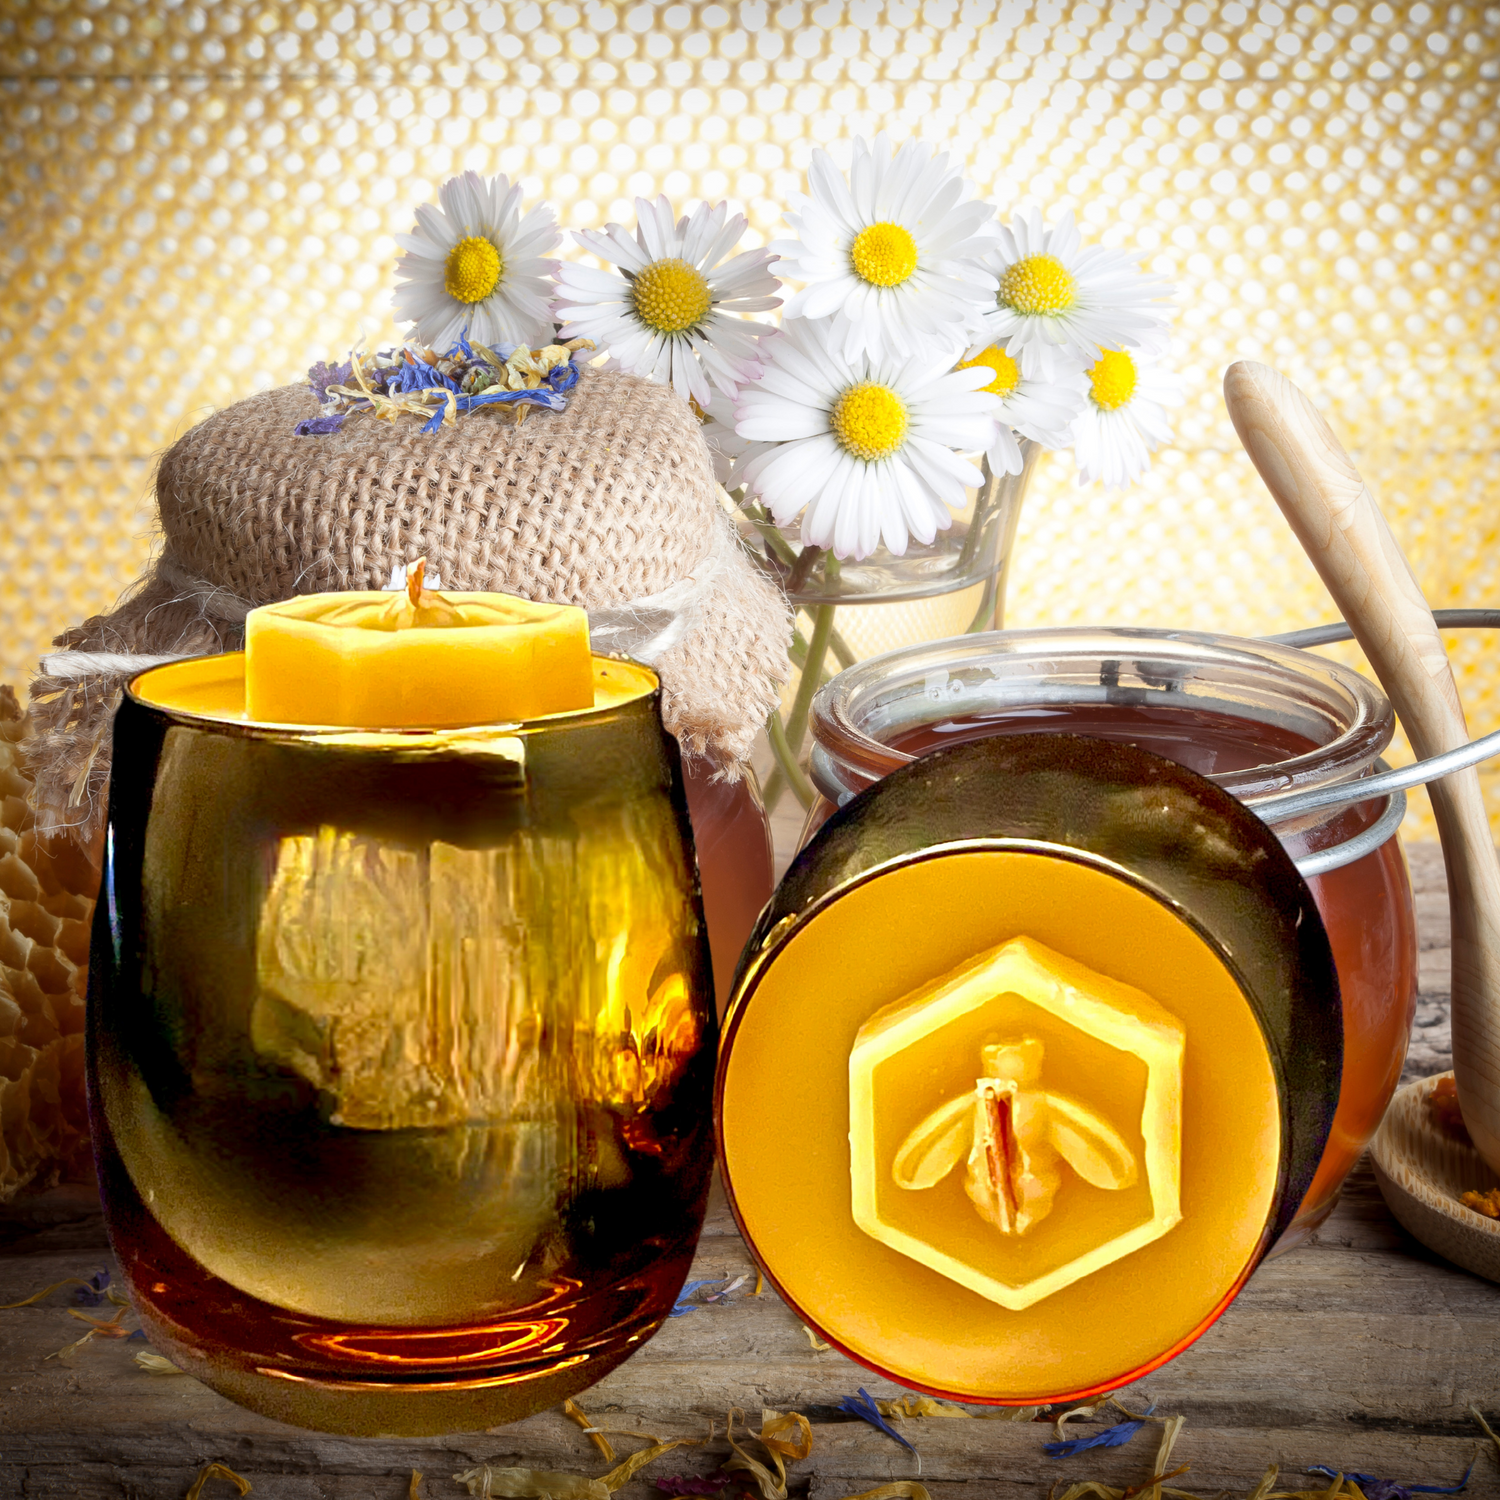 Alchemy 7 | Honey Vanilla - 12 oz Beeswax Candle - Autumn/Winter Candle